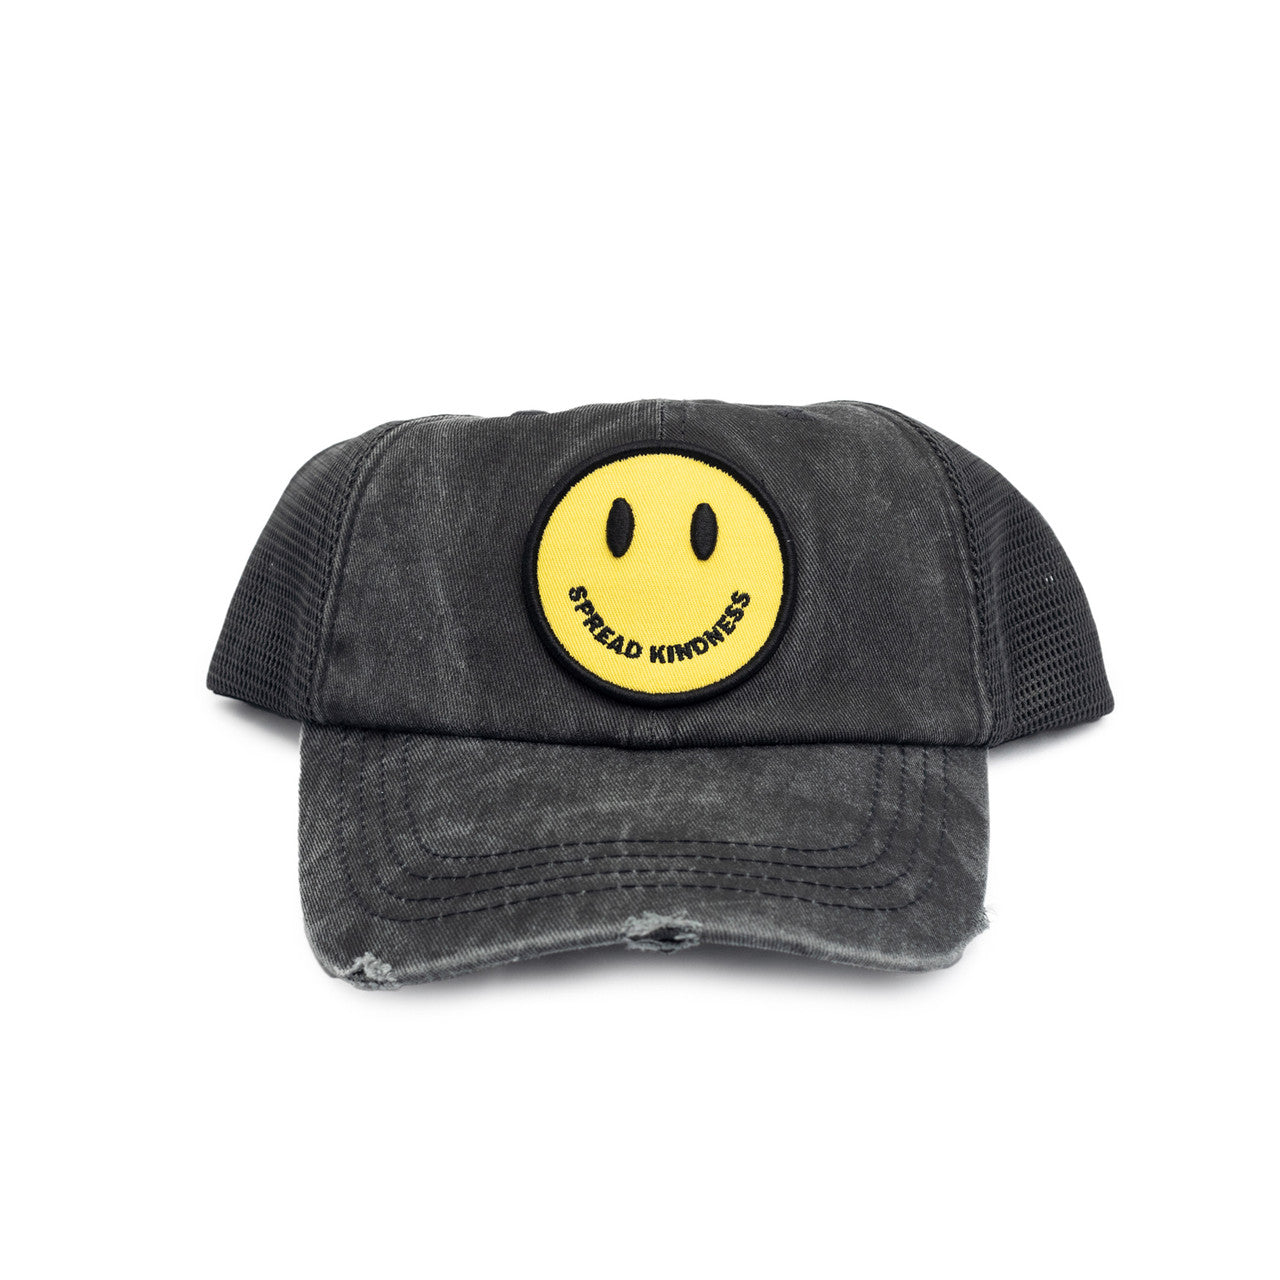 Sugarboo Smiley Hat